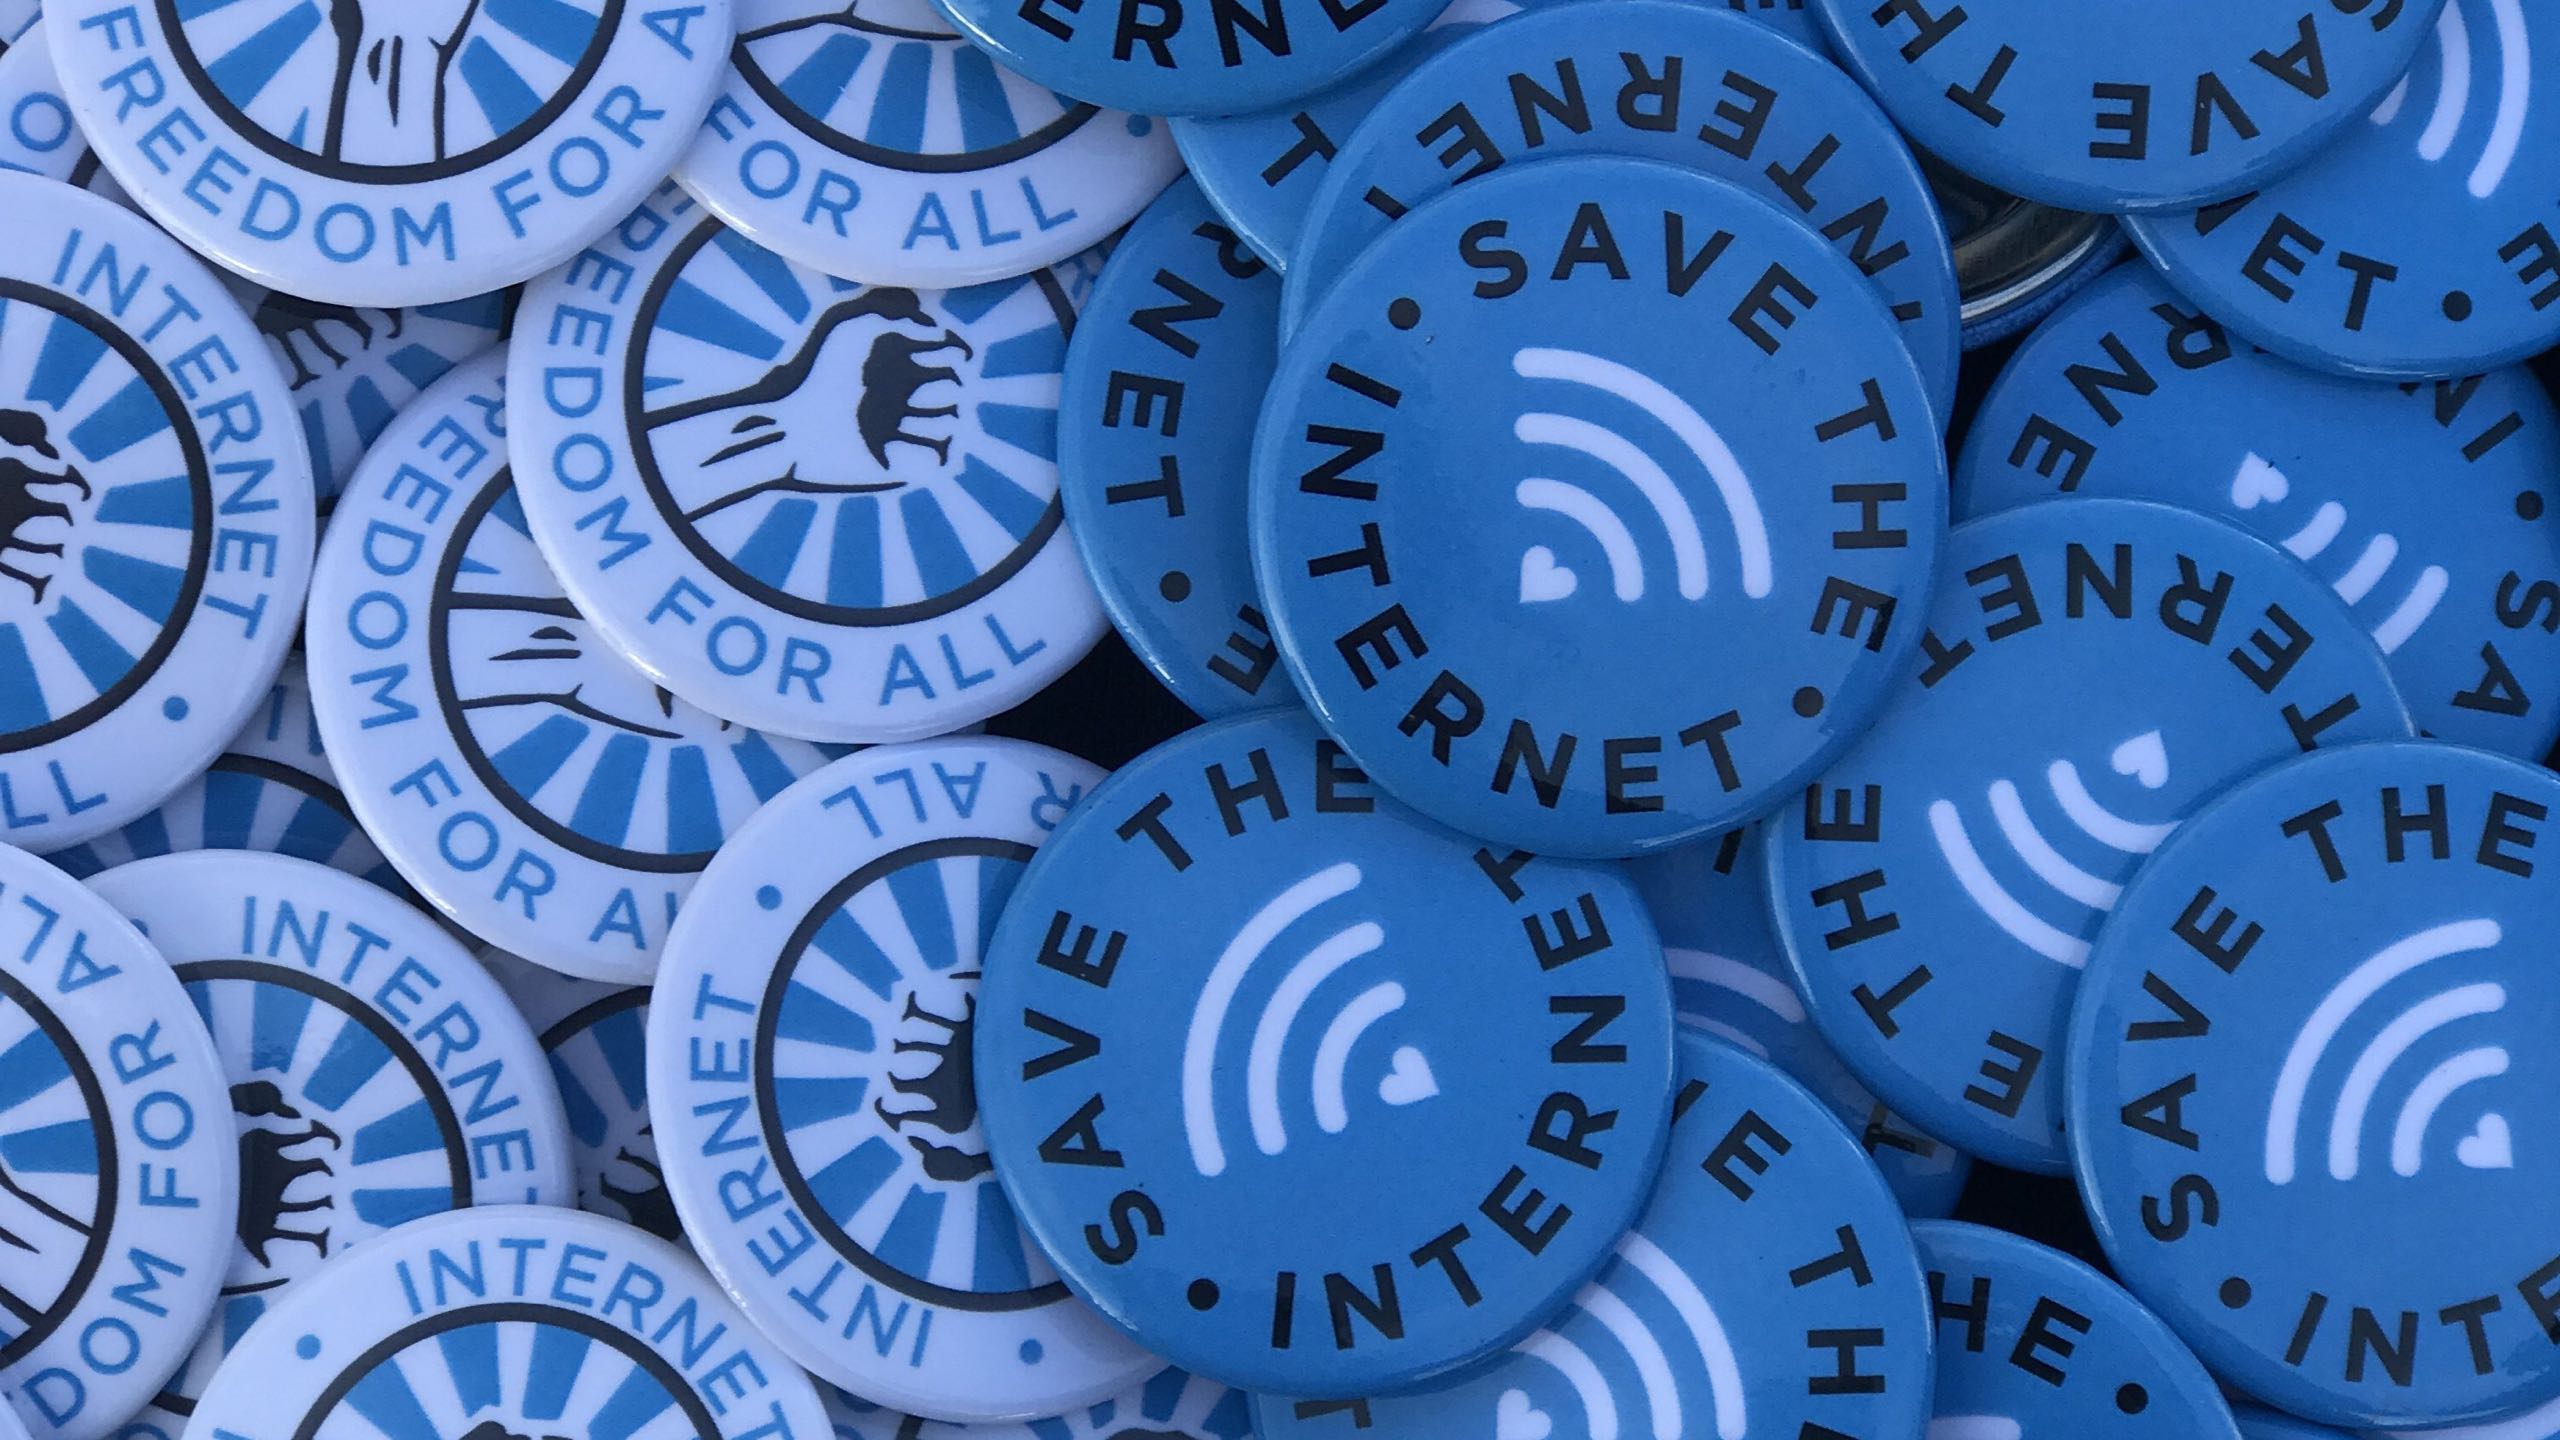 Save the Internet, and Freedom for All buttons